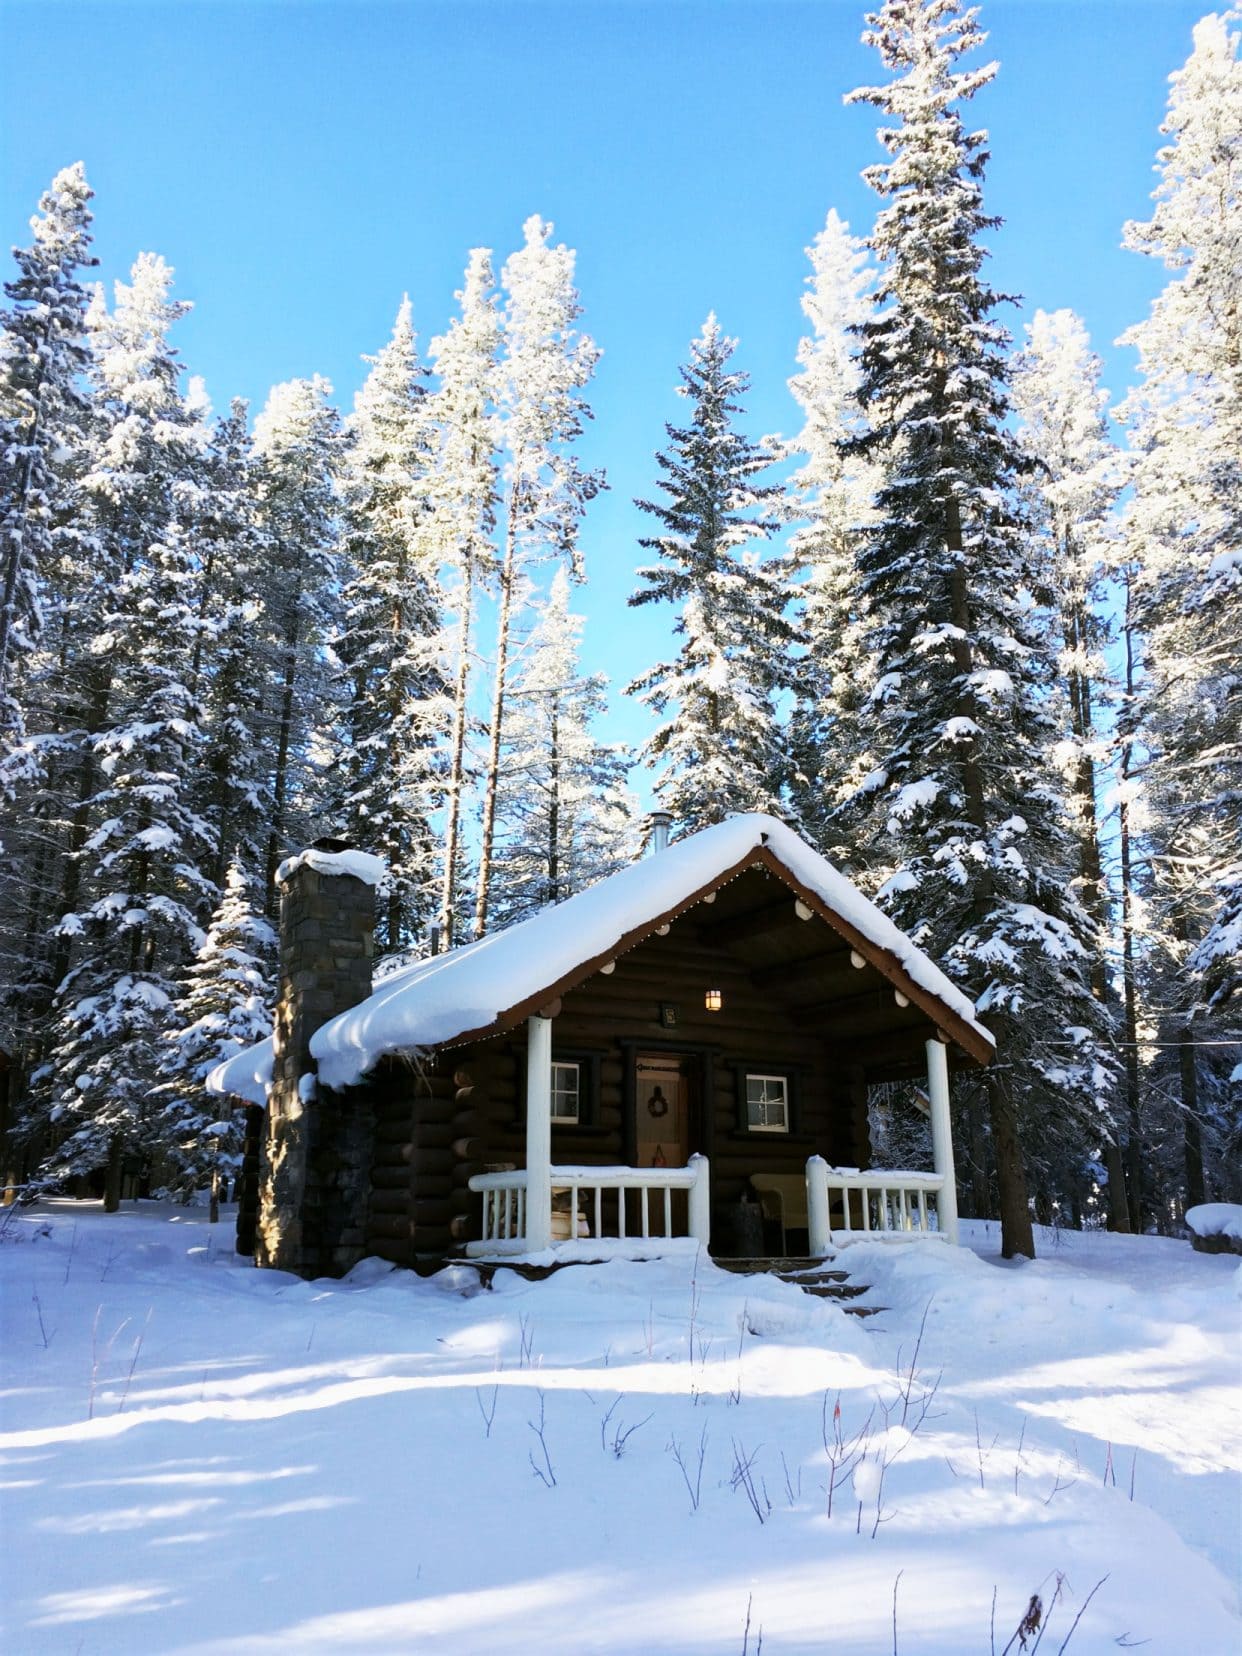 Log cabin in the snow at Banff national Park, Canada